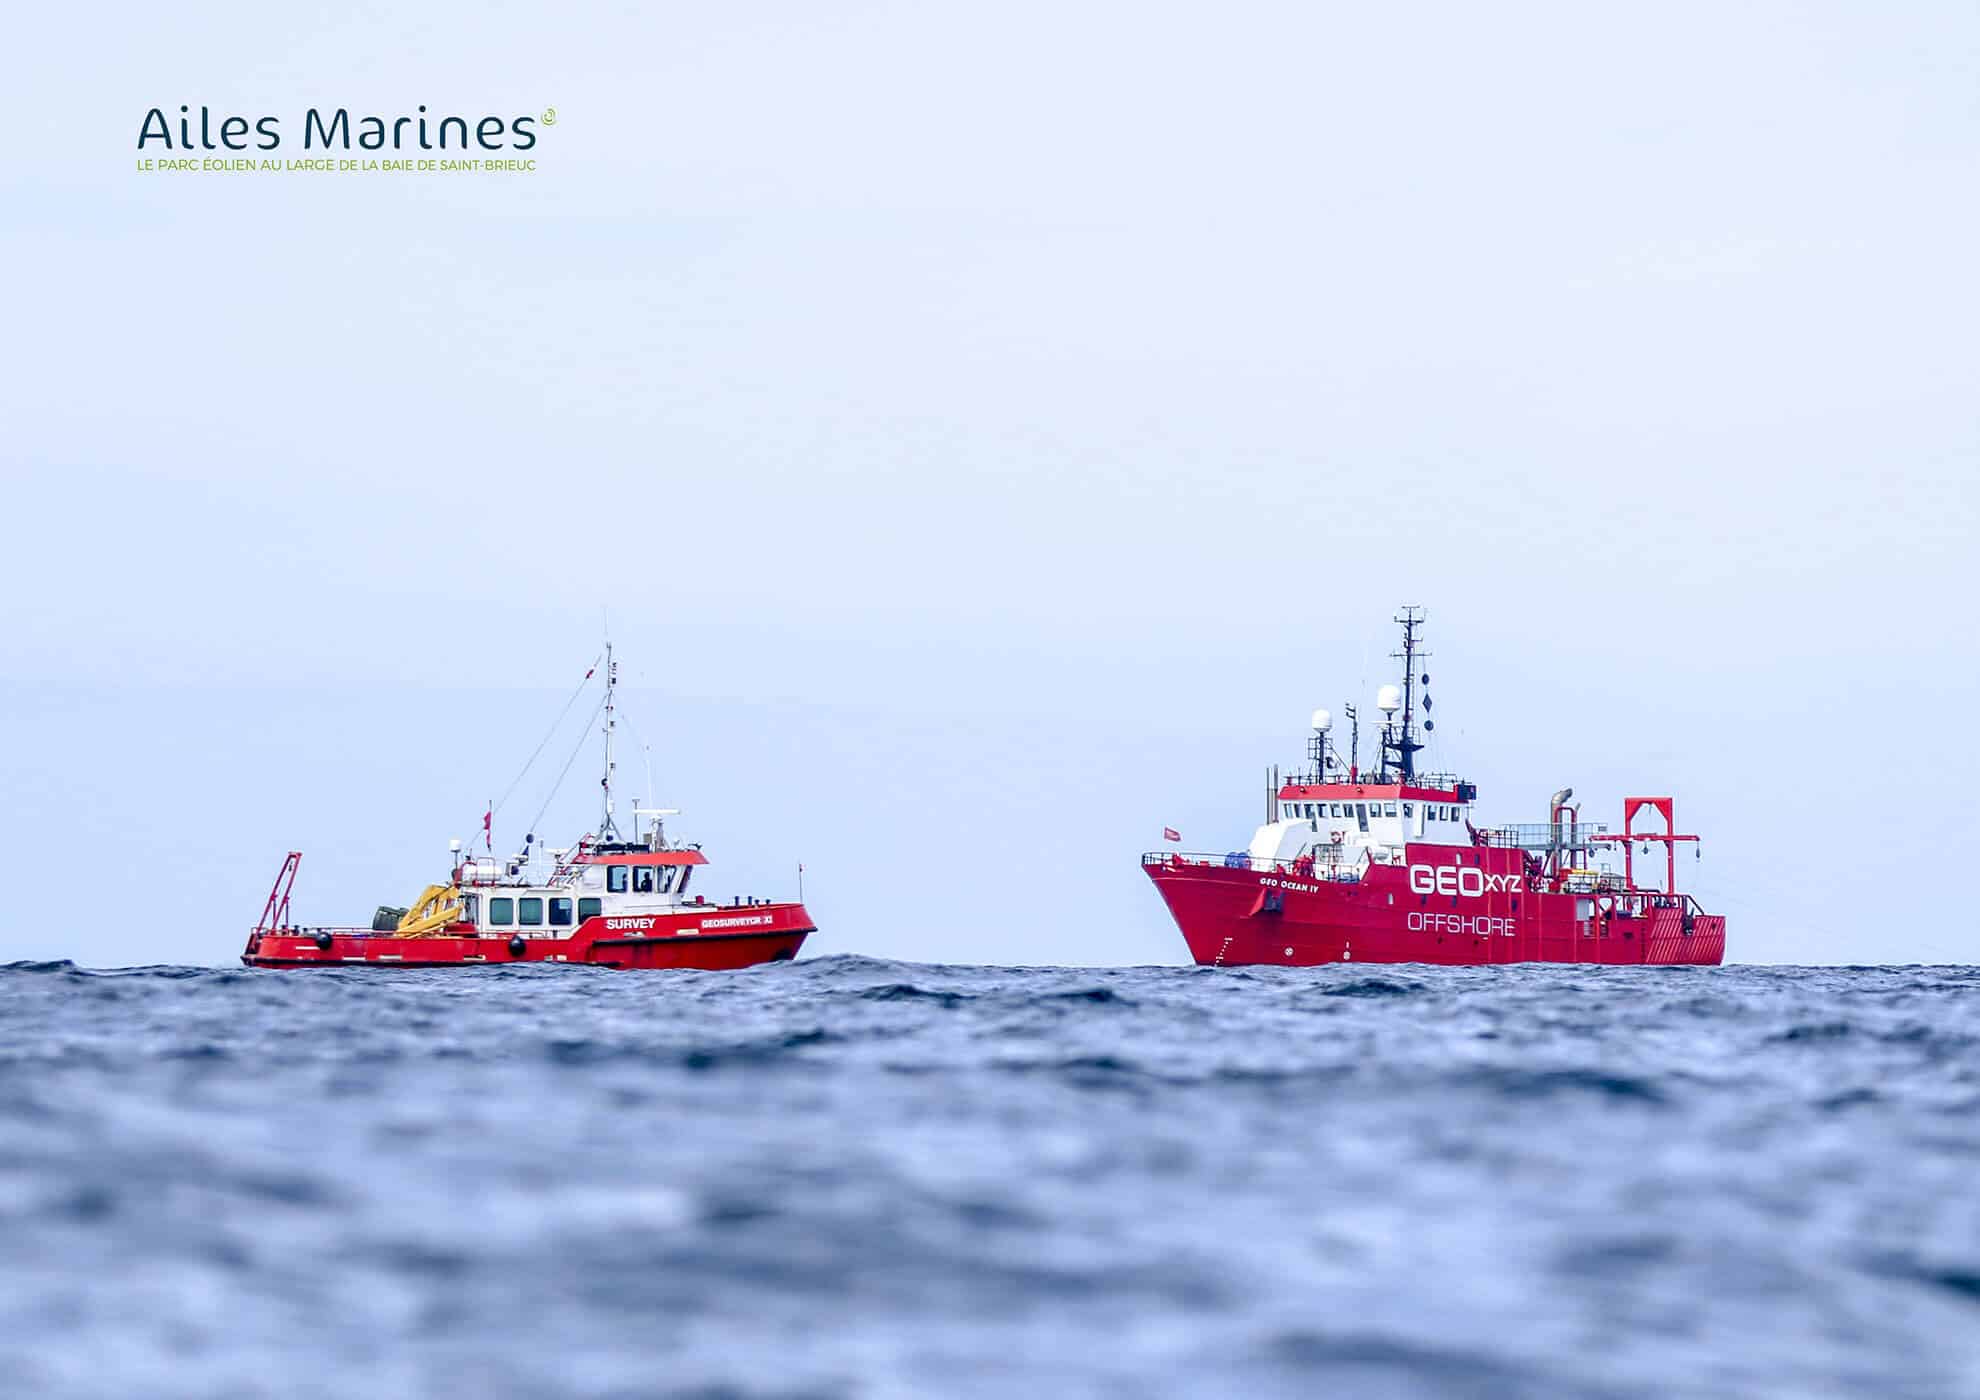 ailes-marines-offshore-two-boats